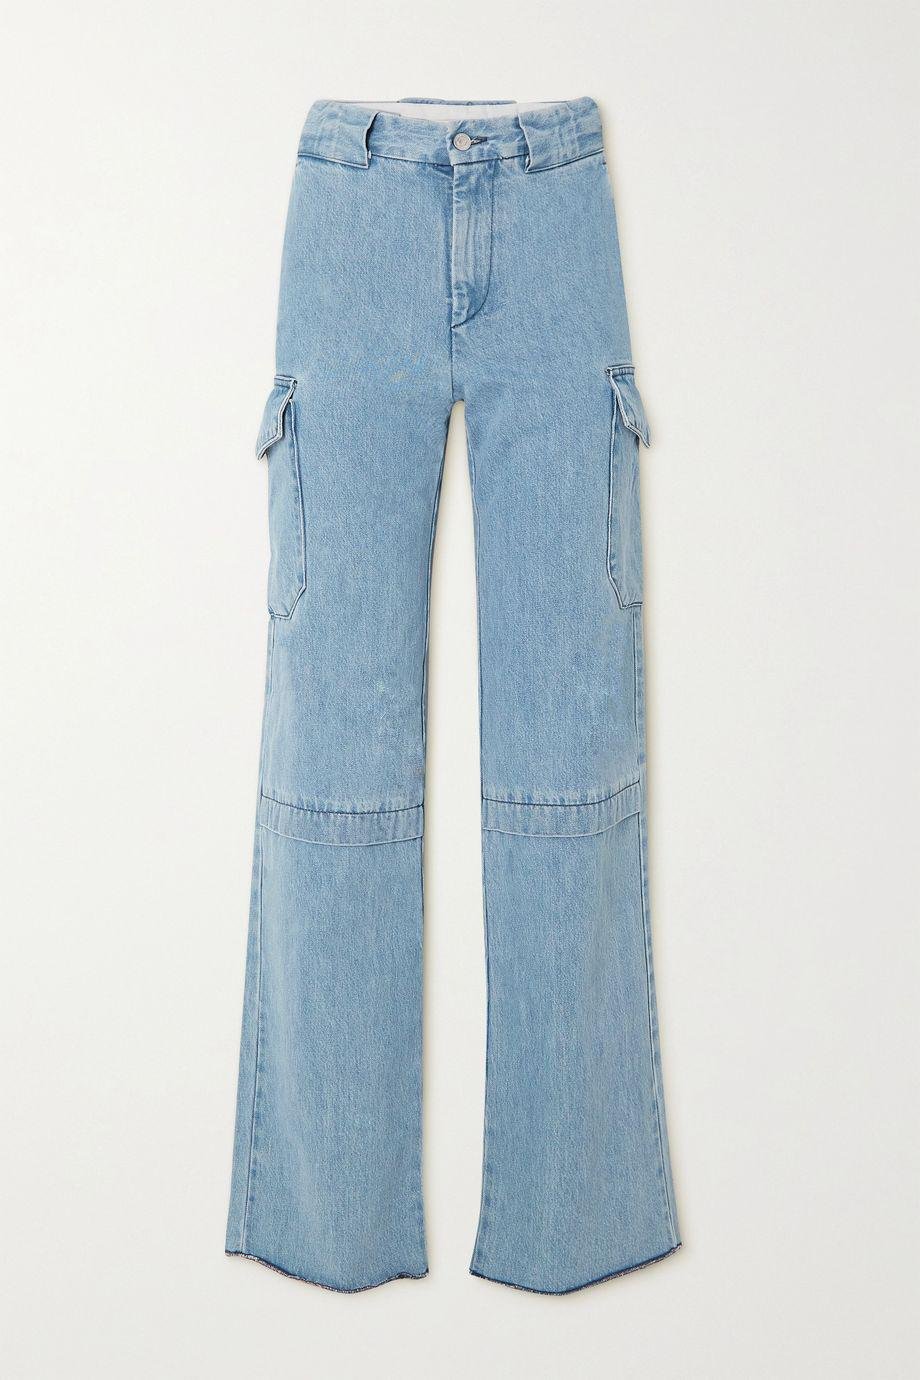 Crash high-rise straight-leg jeans by COMMISSION